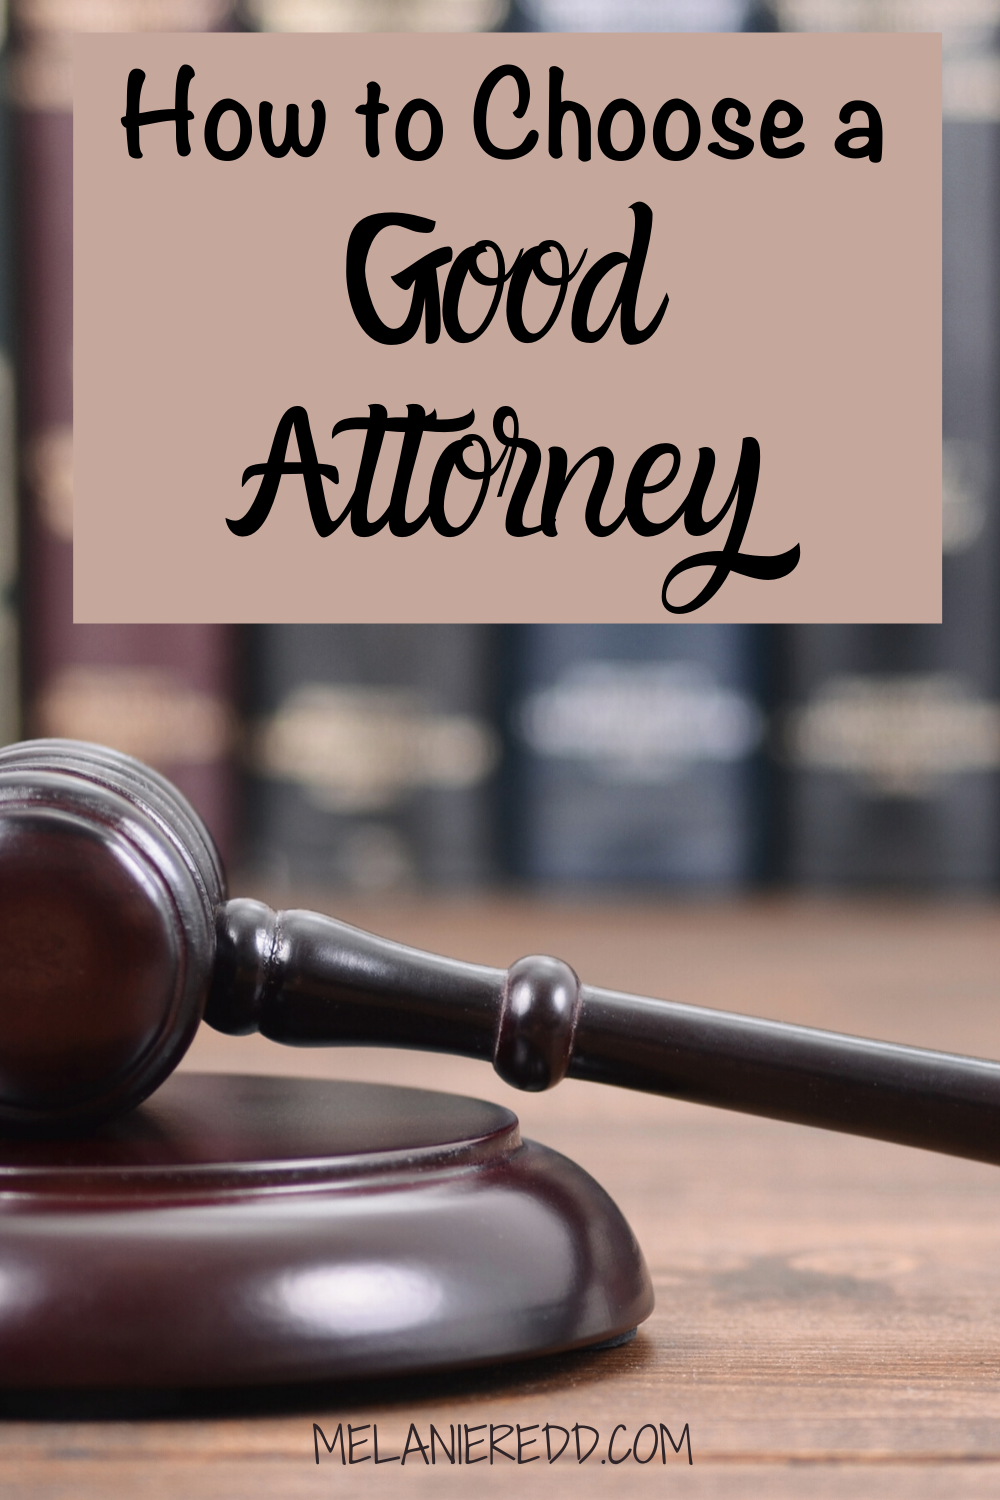 Although we don't plan on it, most of us will need a good attorney at one season or another. Here is how to choose a good attorney (when you need one). #attorney #lawyer #findattorney #chooseattorney